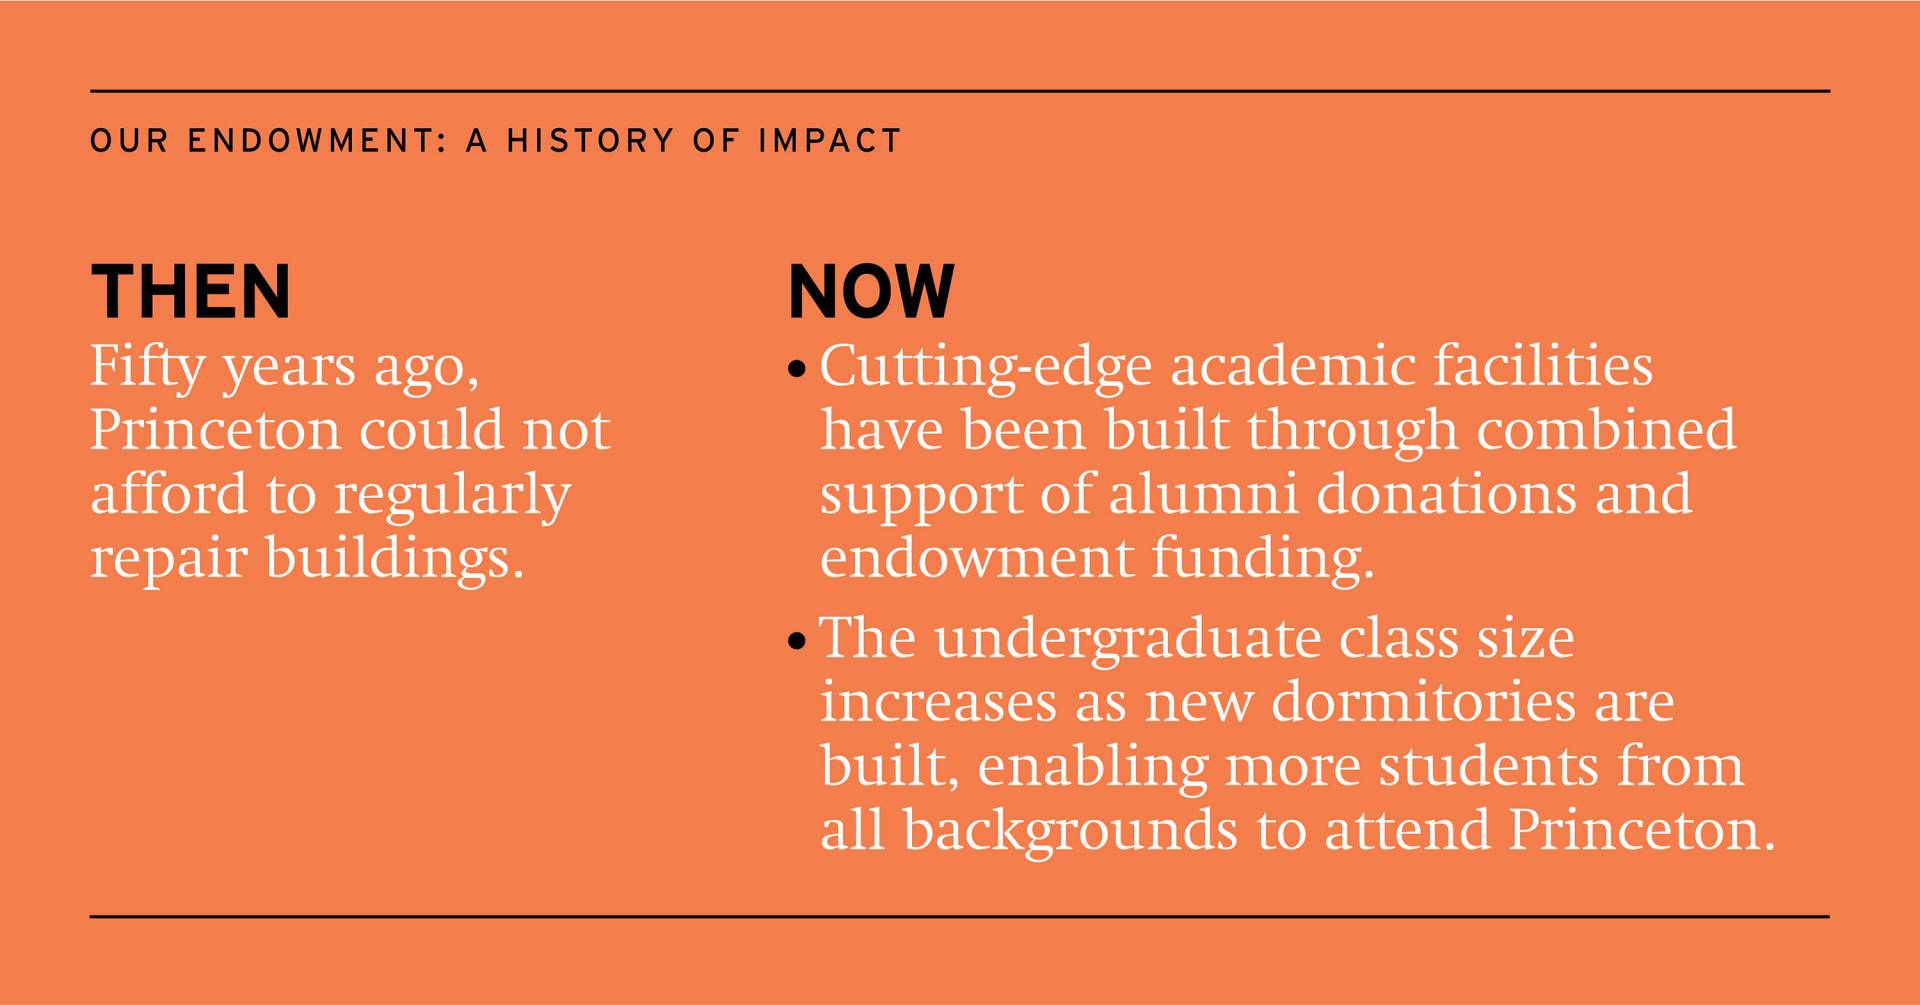 Then: Fifty years ago, Princeton could not afford to regularly repair buildings.  Now: Cutting-edge academic facilities    have been built through combined    support of alumni donations and    endowment funding.  ● The undergraduate class size increases as new dormitories are built, enabling more students from all backgrounds to attend Princeton.